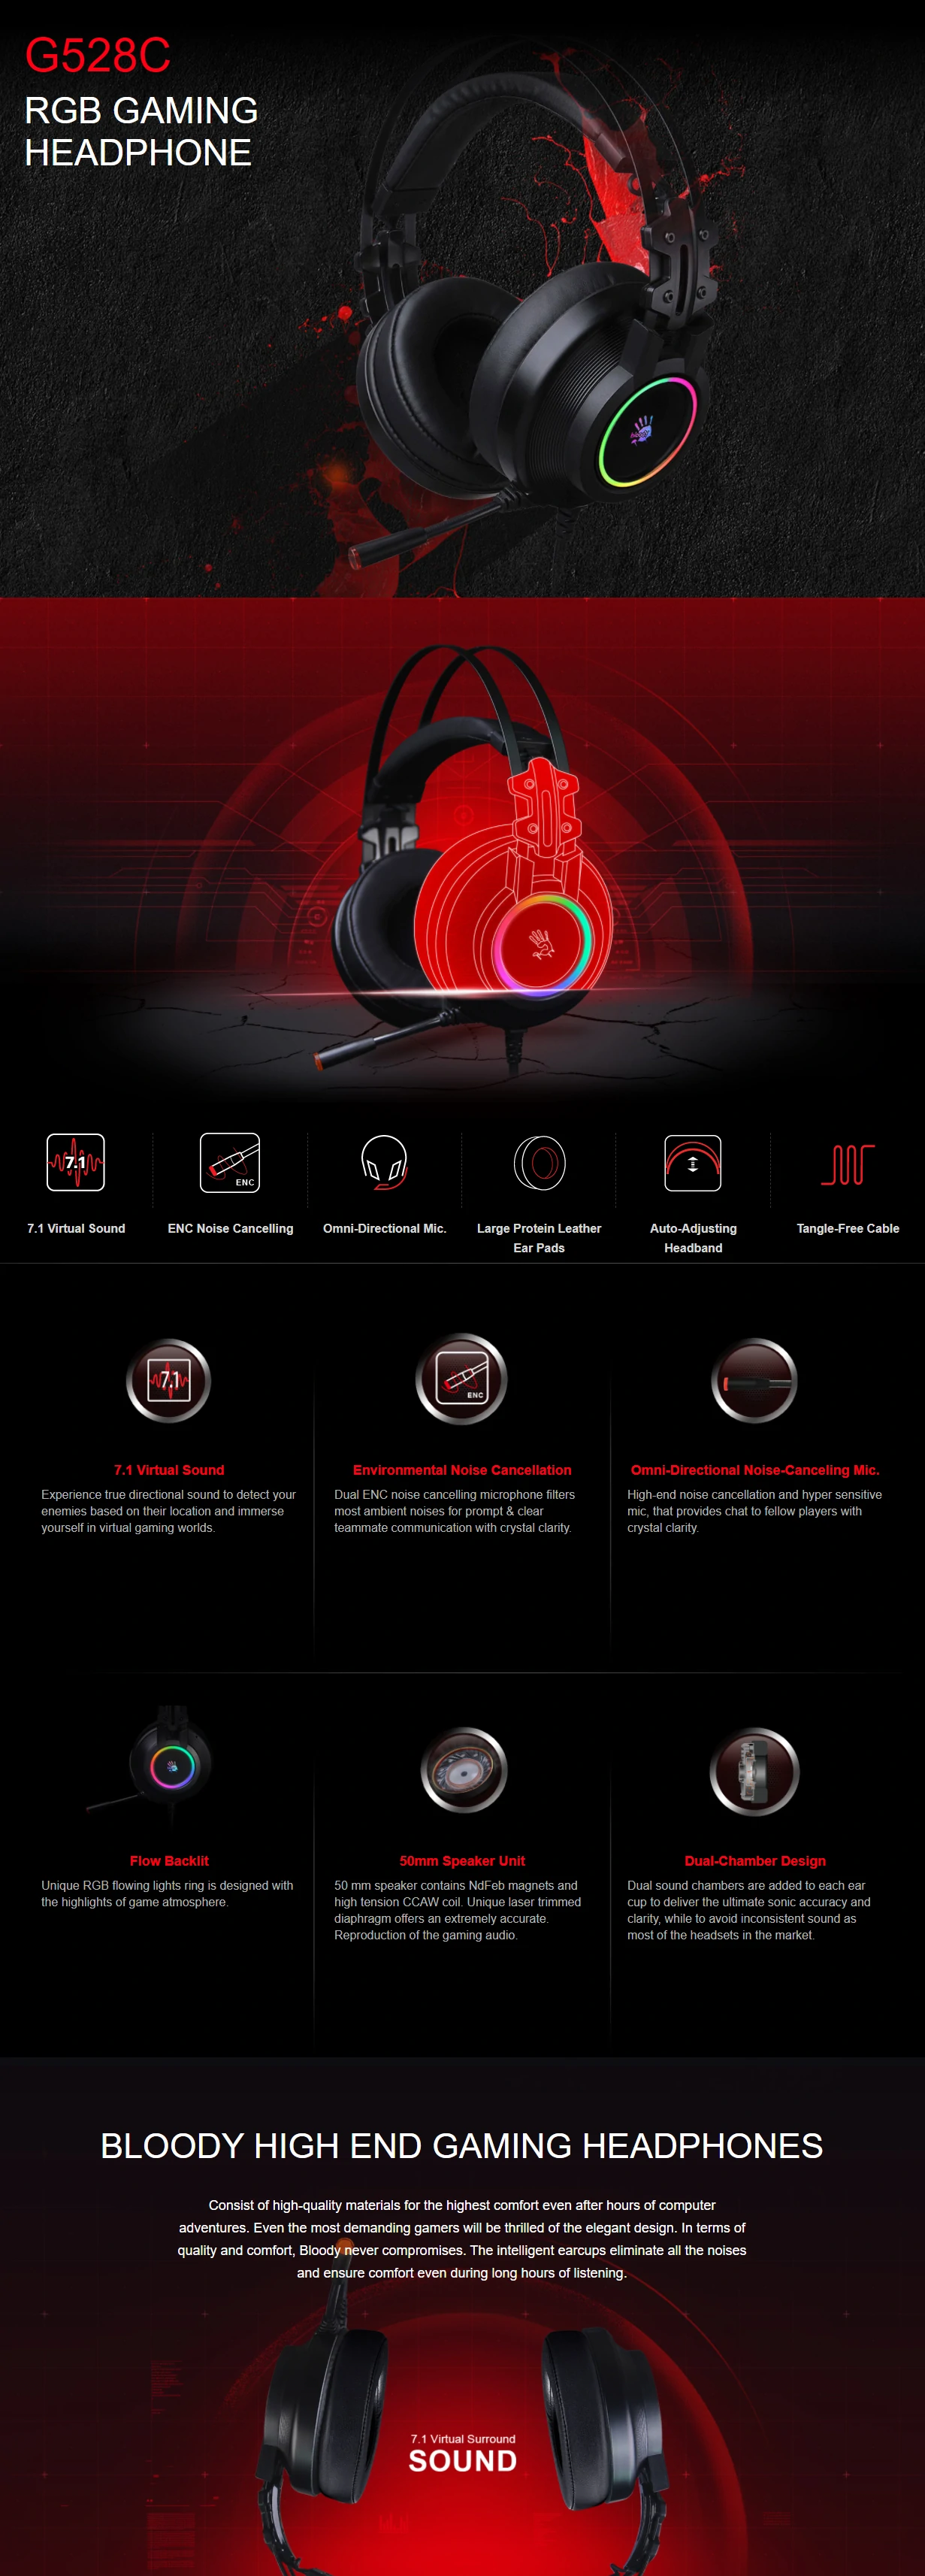 Overview - Bloody - G528C RGB Gaming Headphones